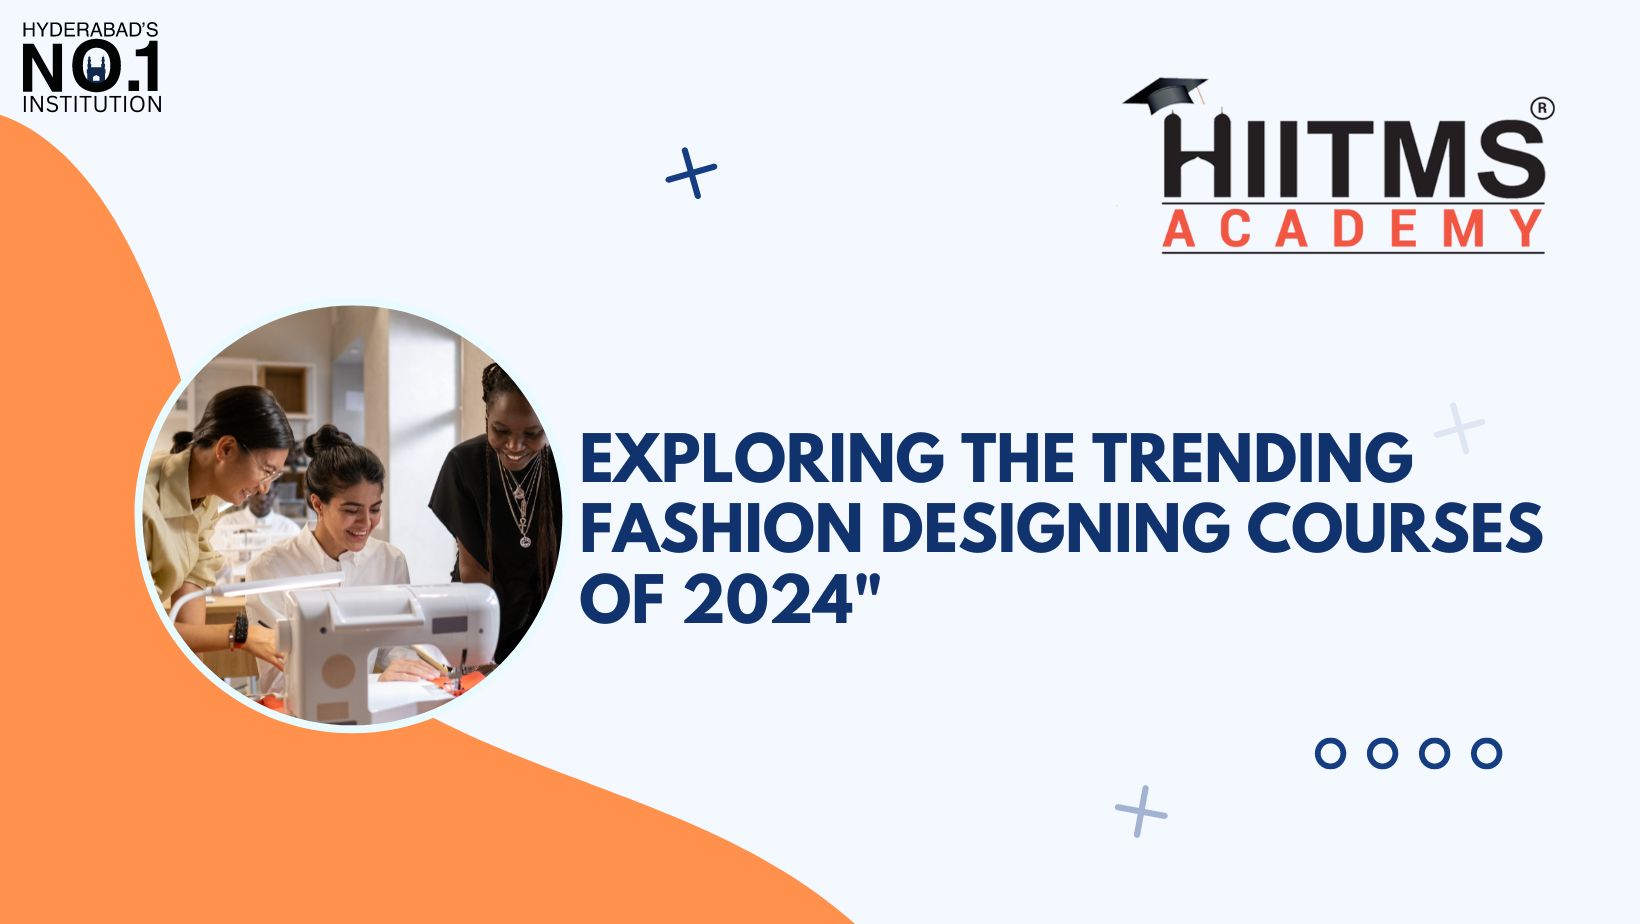 "Navigating Fashion Design Education Trends in 2024"